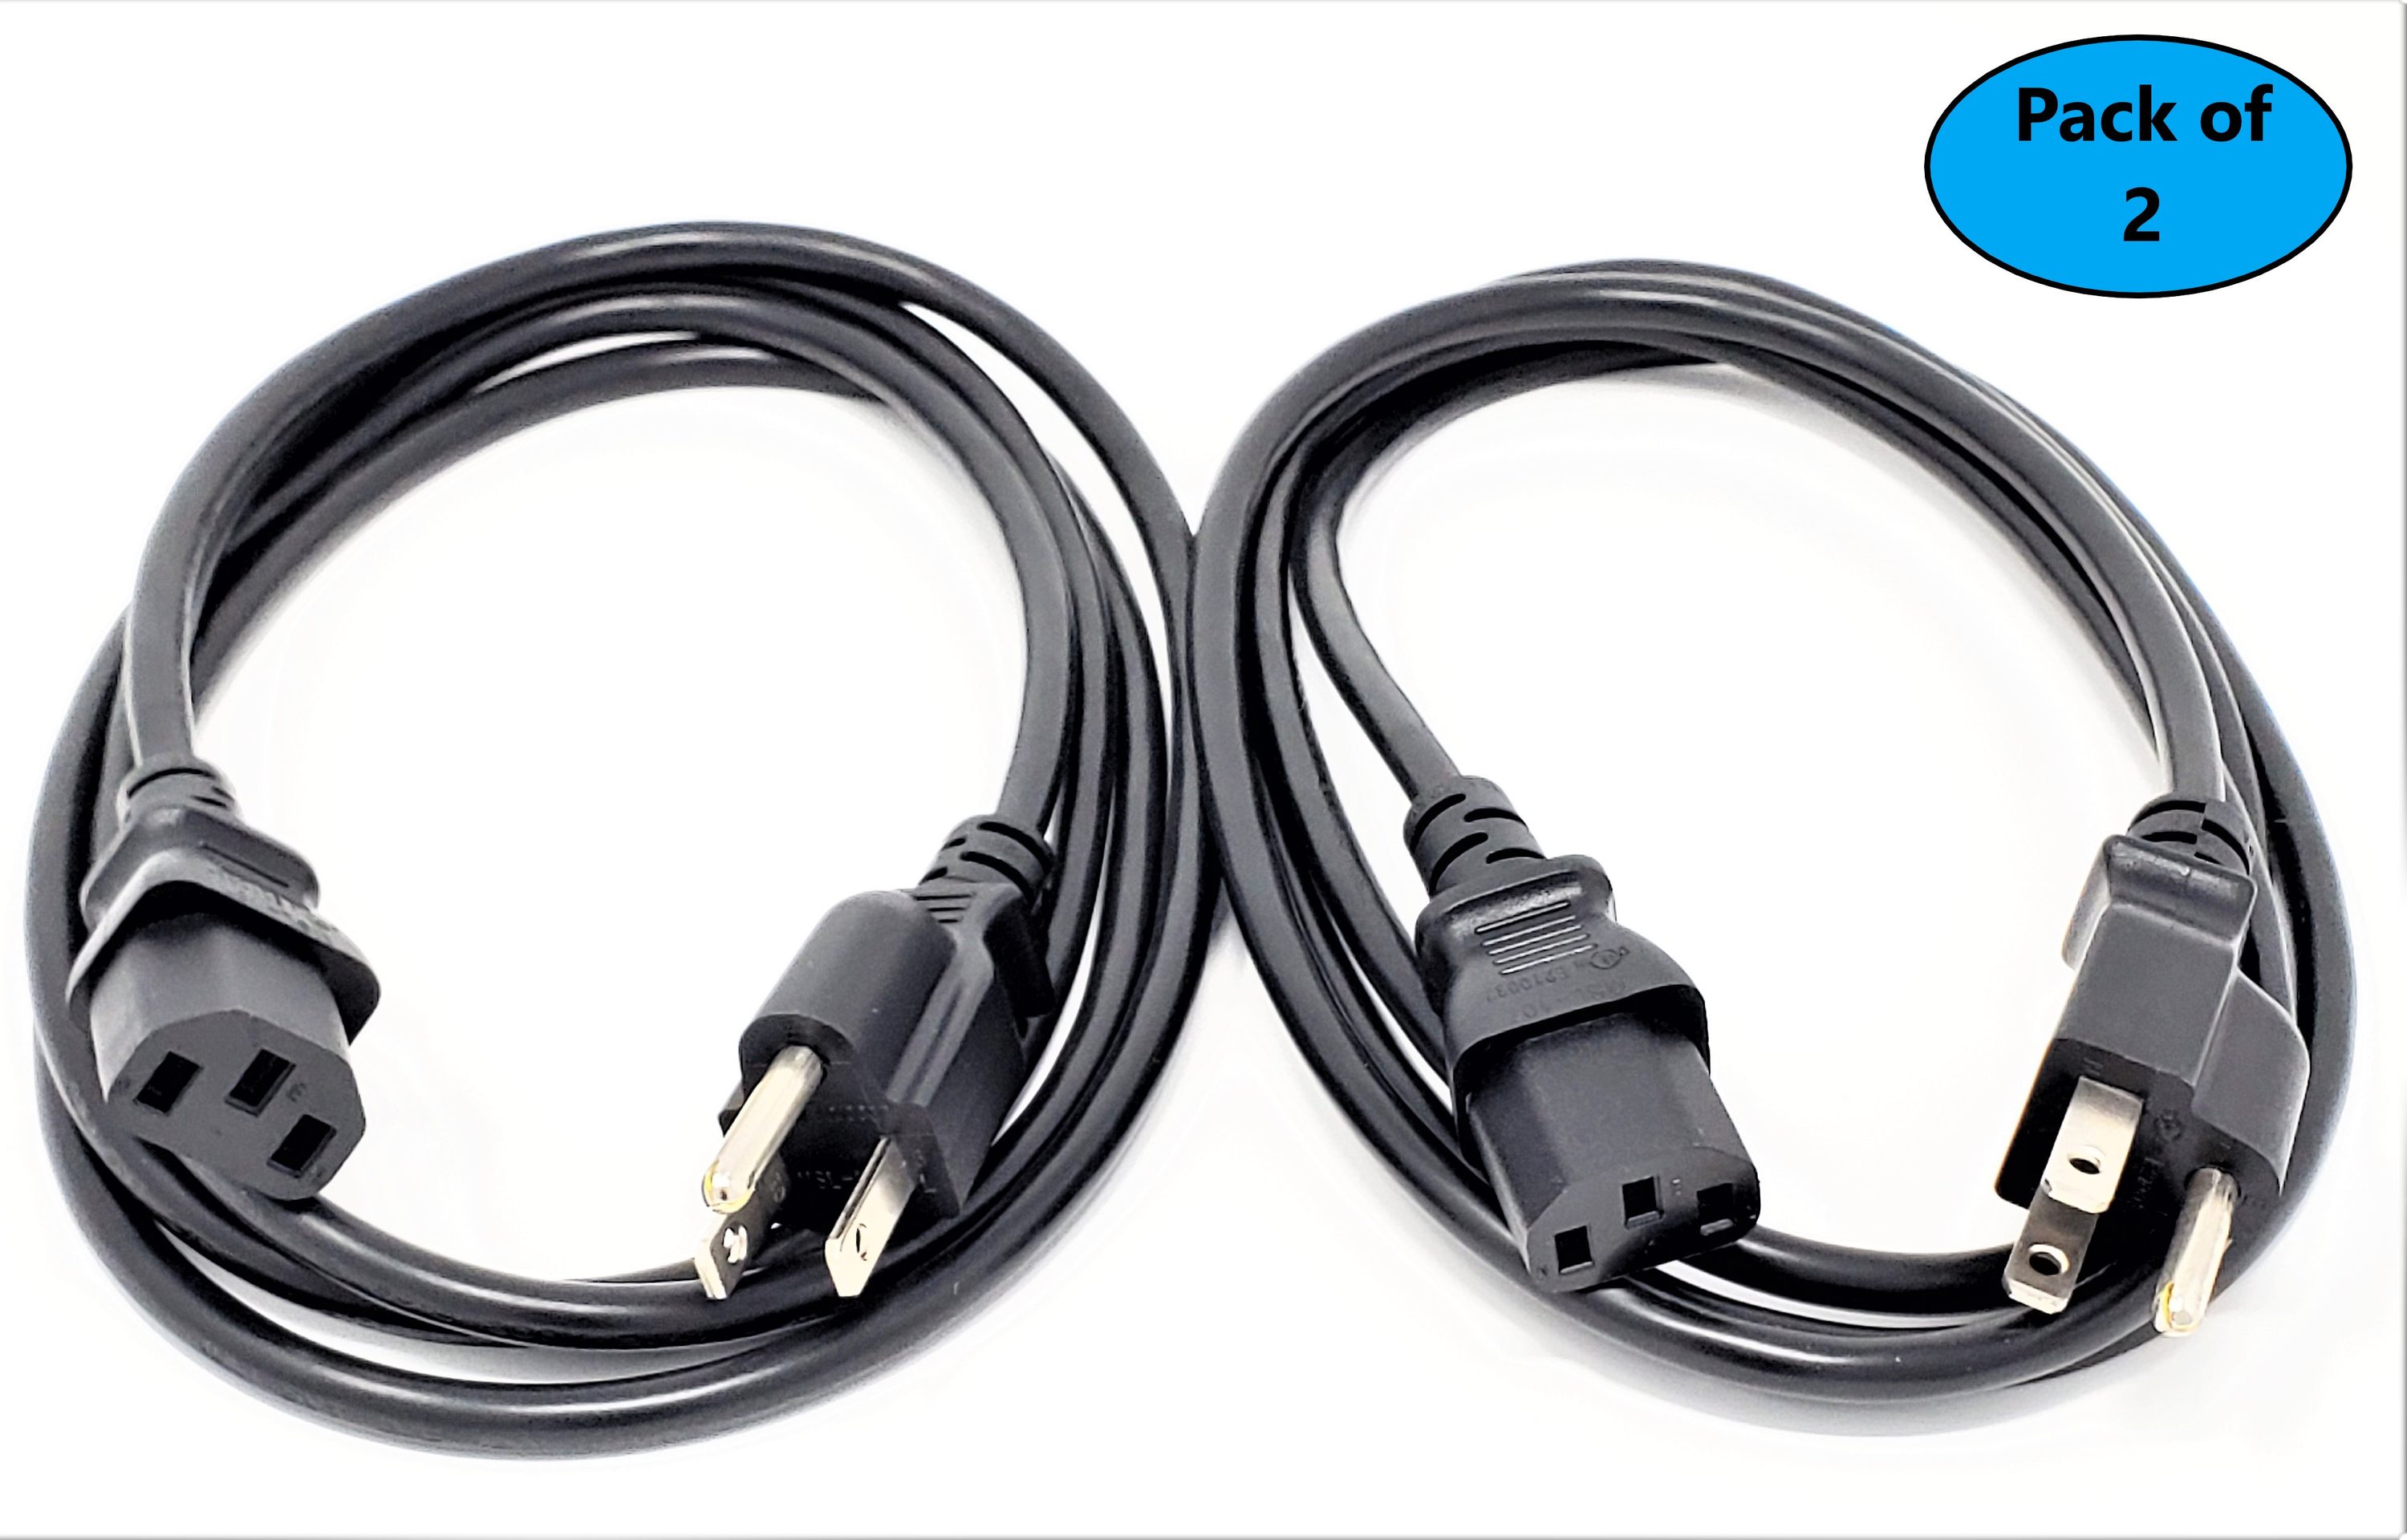 2x Pack 2ft 3-Conductor 14AWG NEMA 5-15P to IEC320 C13 PC Power Cord Cable 